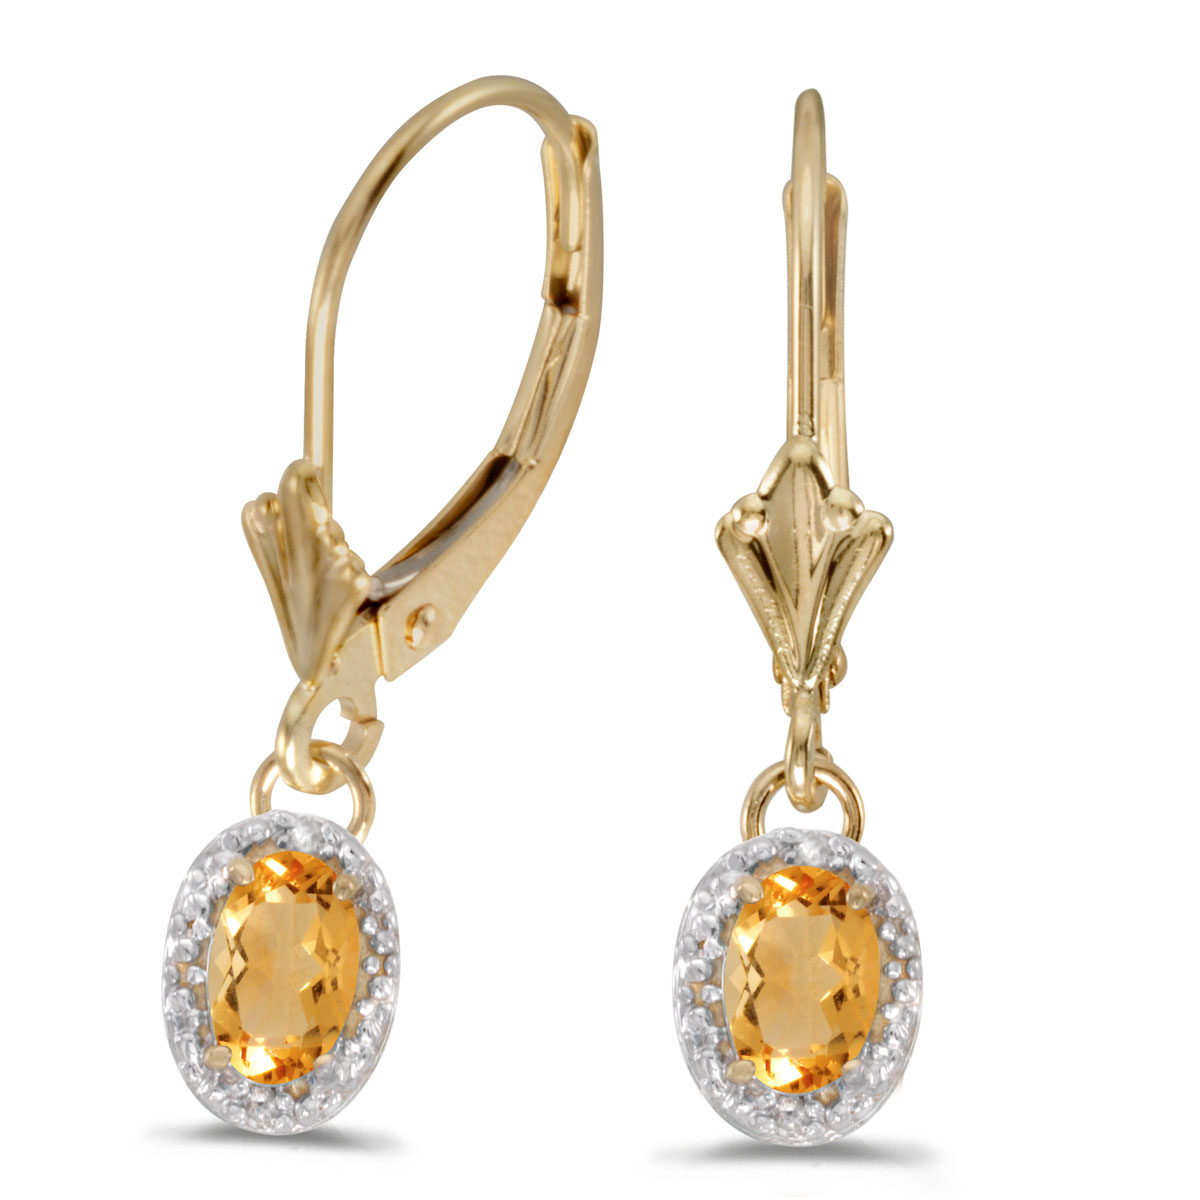 JCX2118: Beautiful 10k yellow gold leverback earrings with sunny 6x4 mm citrines complemented with bright diamonds.